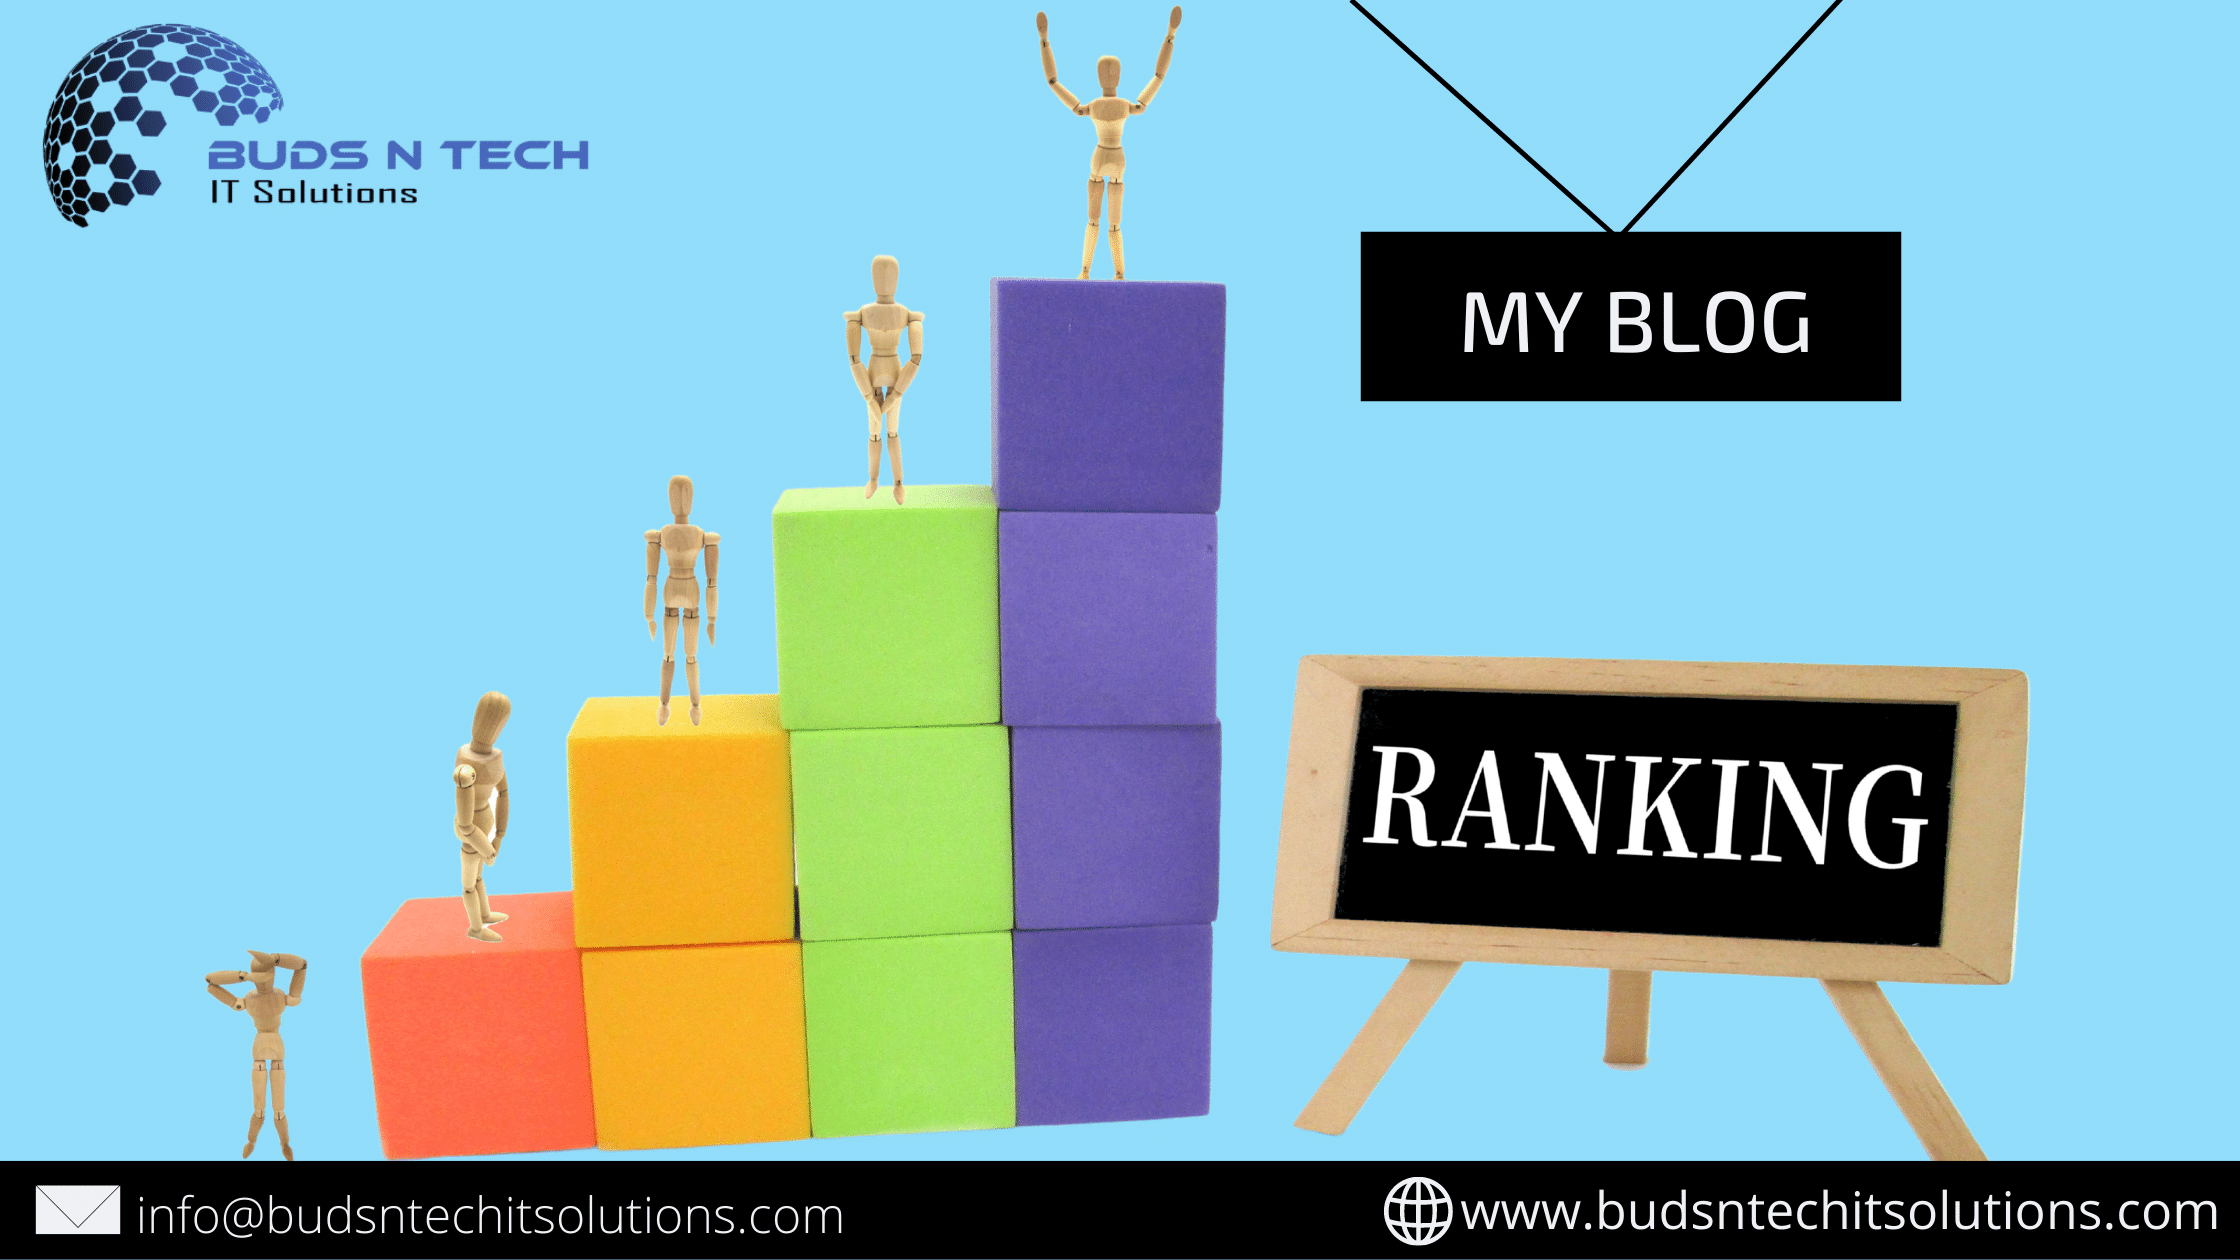 How to do blogging for SEO ranking